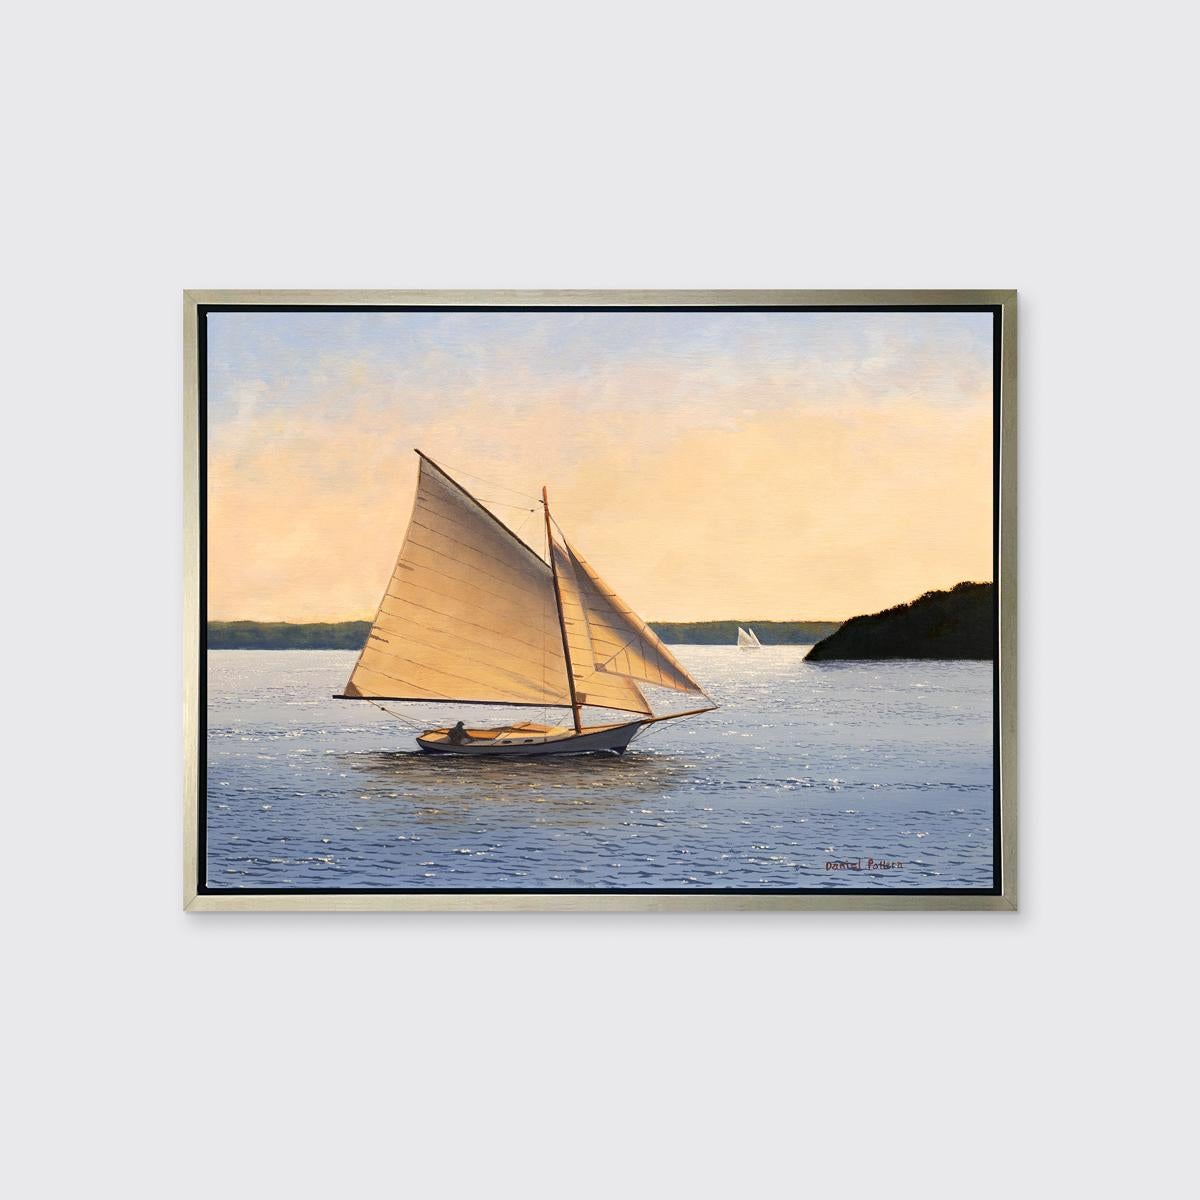 This coastal seascape Limited Edition giclee print by Daniel Pollera captures a sailboat at sunset. A single figure can be seen in the boat itself, navigating past a shadowed coastline covered in trees and foliage, with other white sailboats further